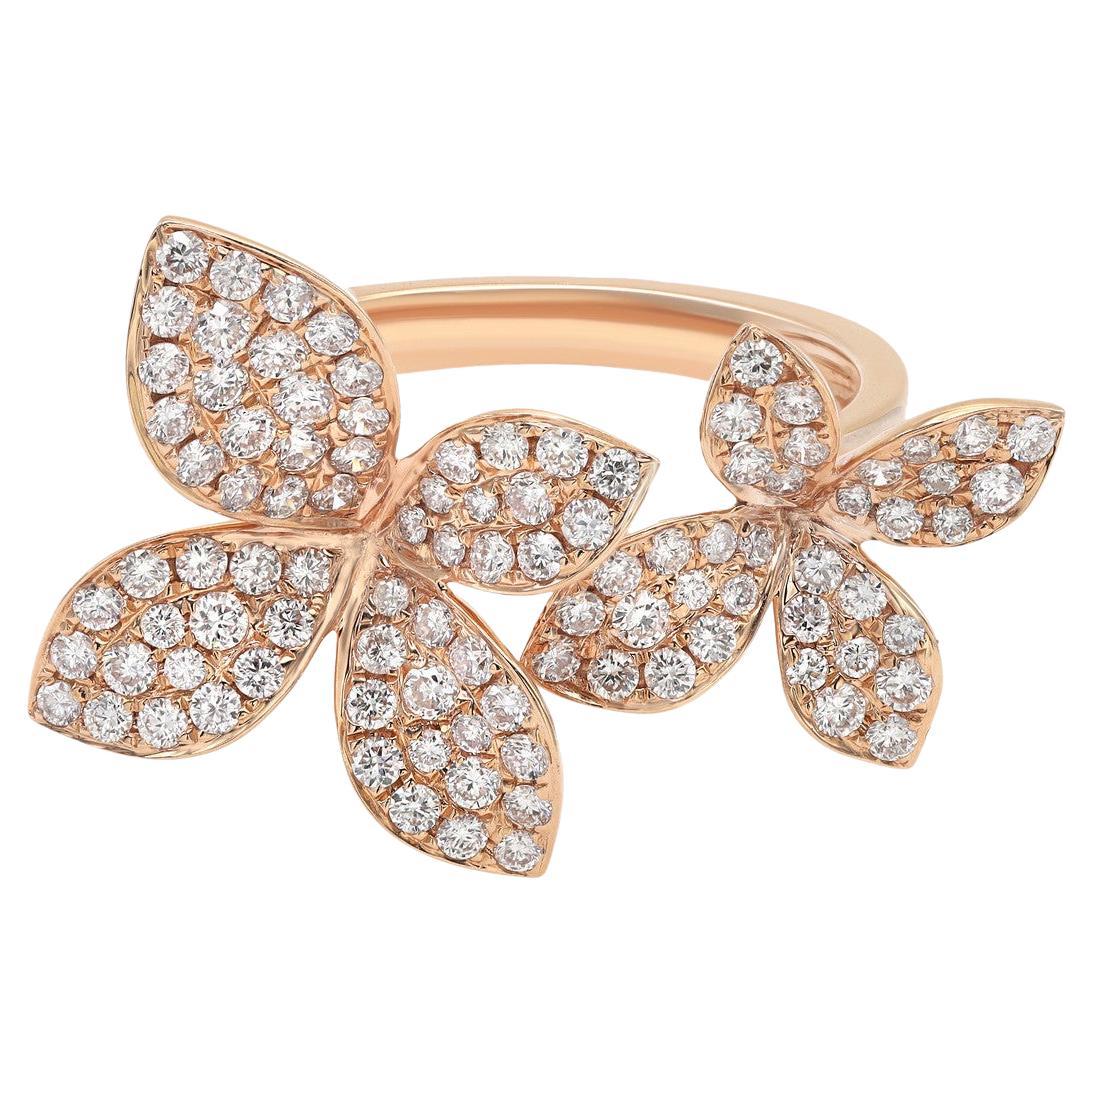 0.95 Carat Diamond Double Flower Statement Ring in 18K Rose Gold For Sale